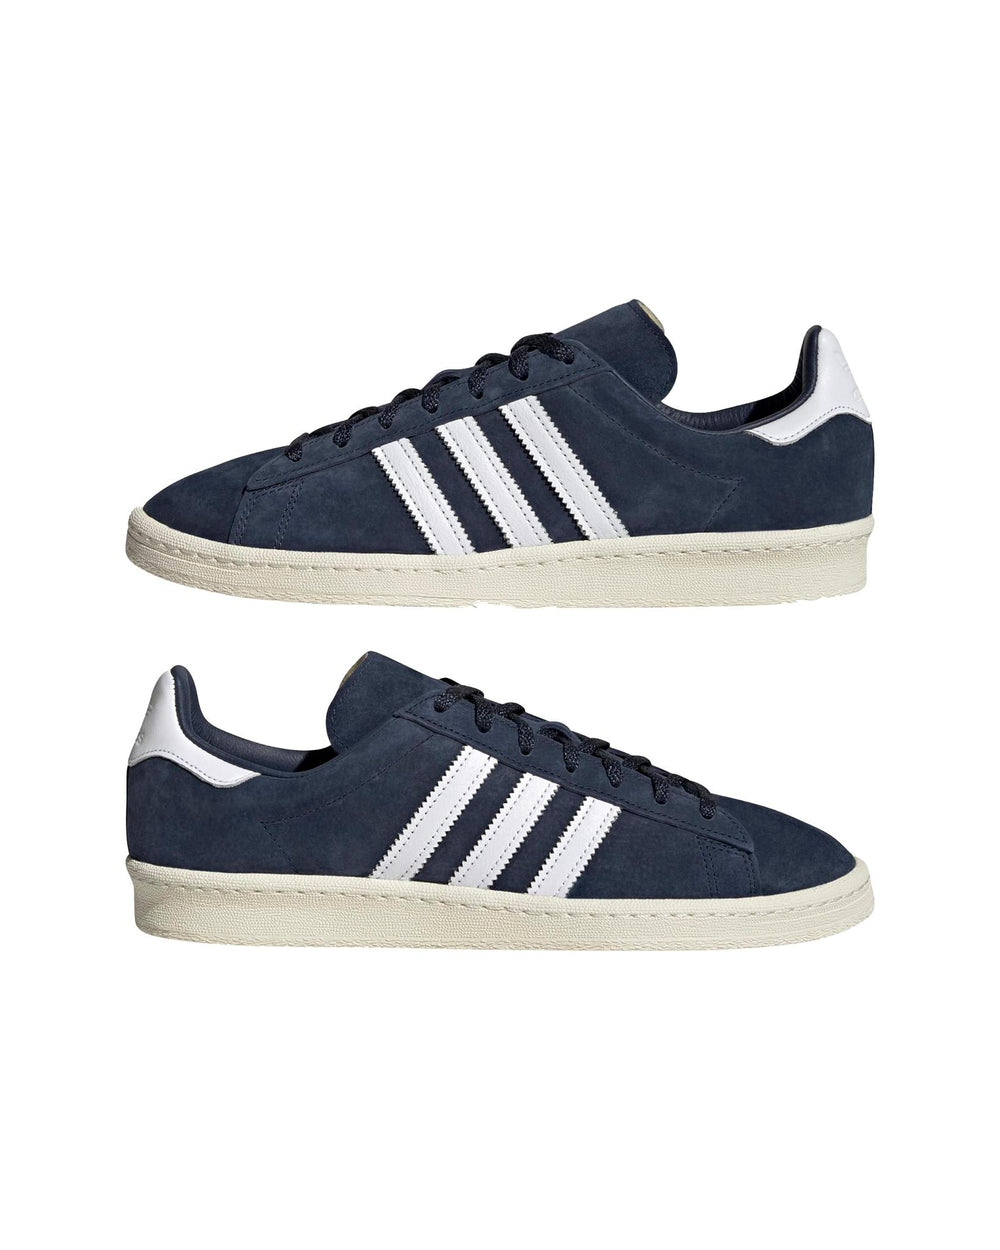 Adidas Campus 80s Shoes Navy |